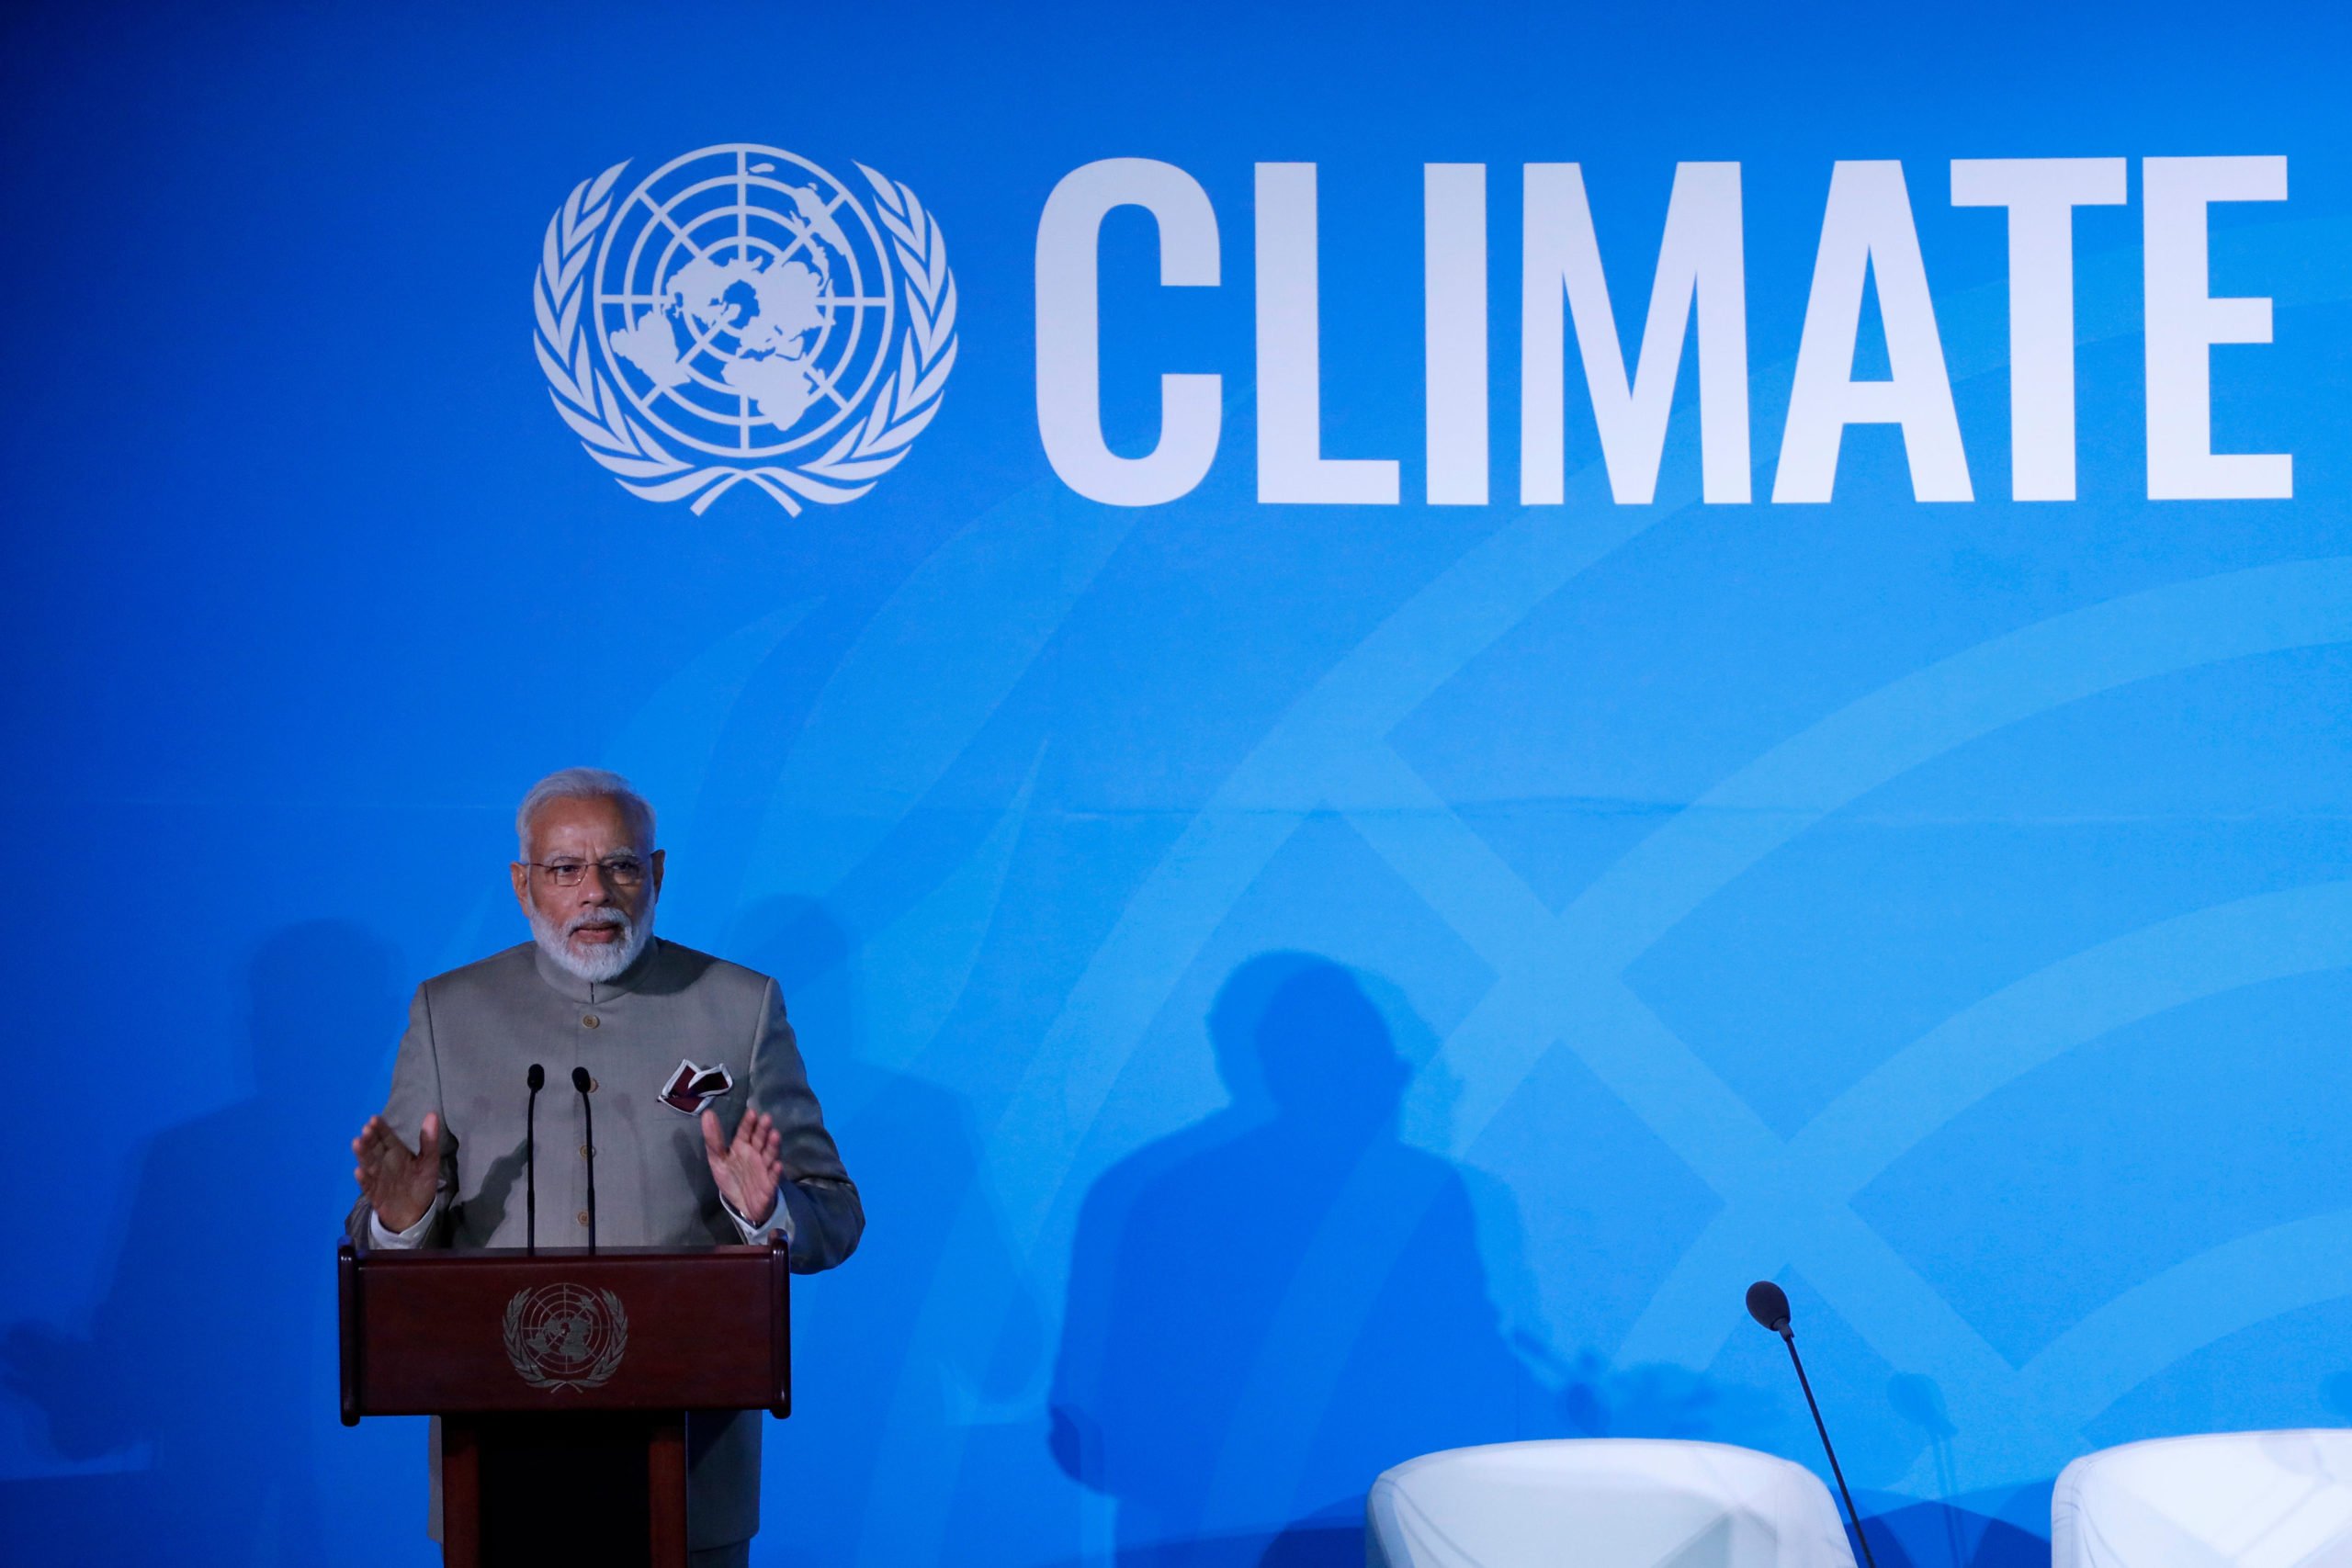 Prime Minister of India Narendra Modi speaking at the UN Climate Action Summit, 2019